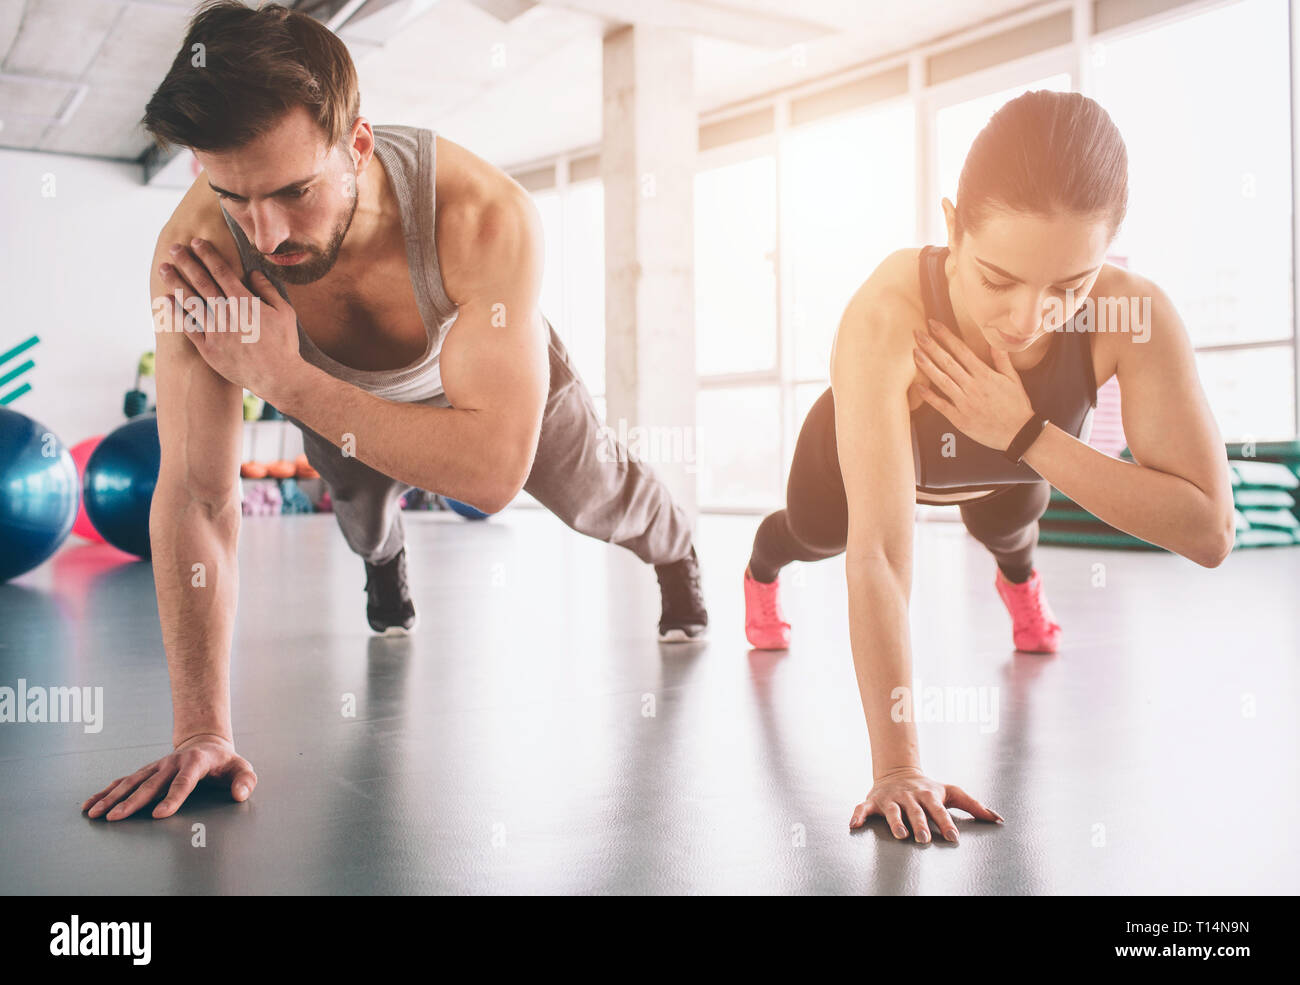 Slim girl and strong man are standing in one hand plank position and balancing on that hand. They look concentrated and concious. Stock Photo